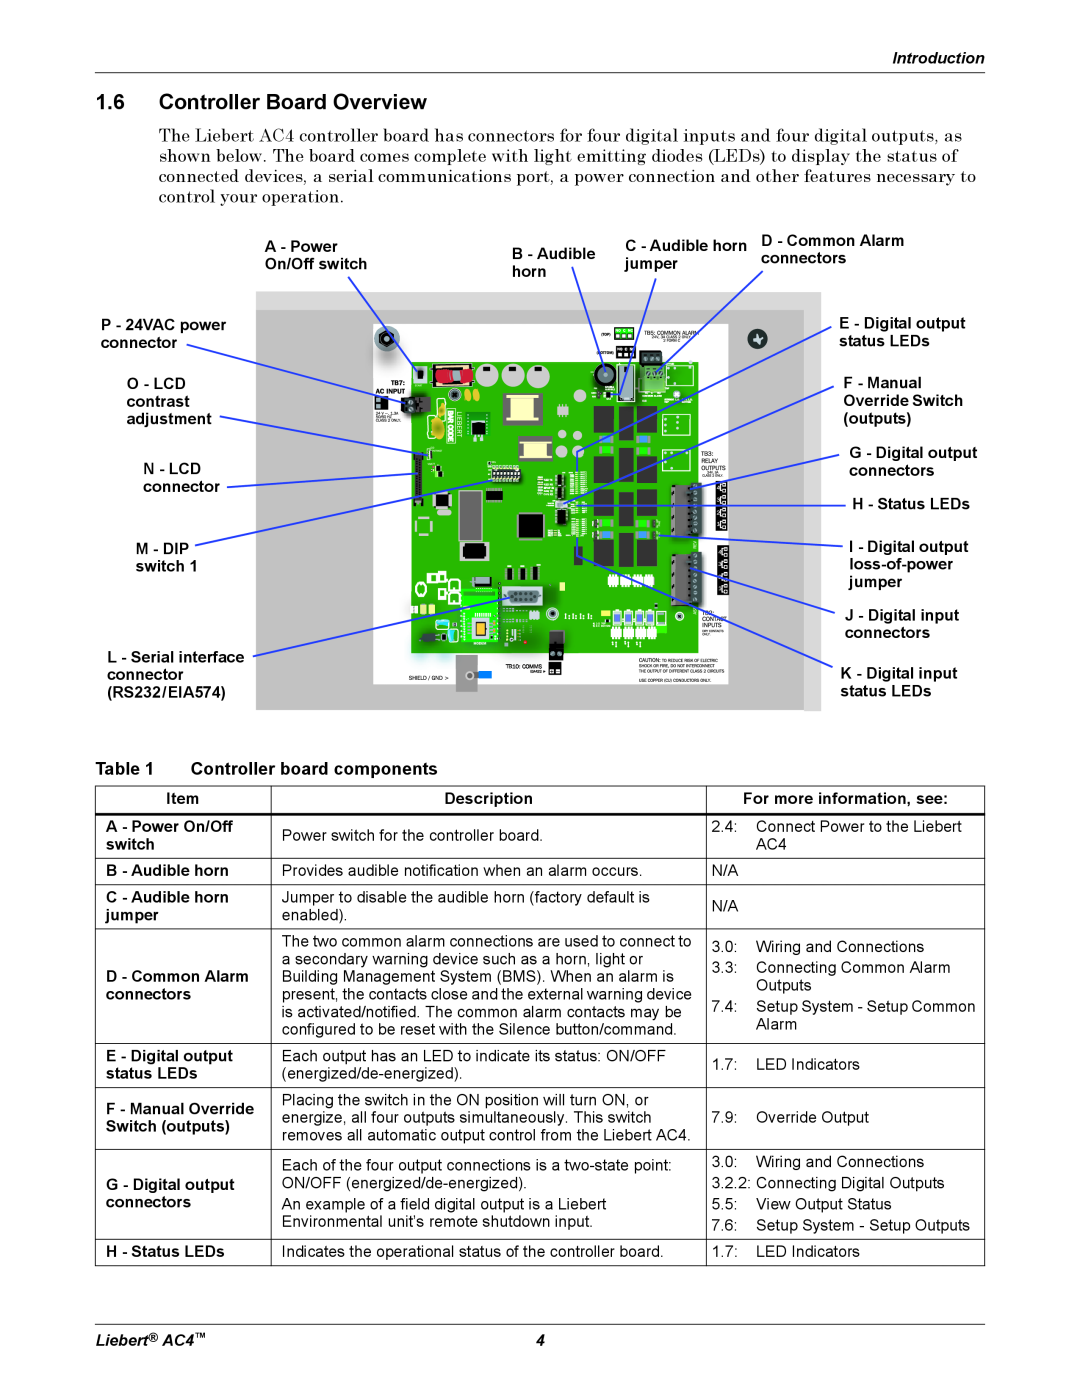 Emerson user manual 1.6Controller Board Overview, Controller board components, Introduction, Liebert AC4 